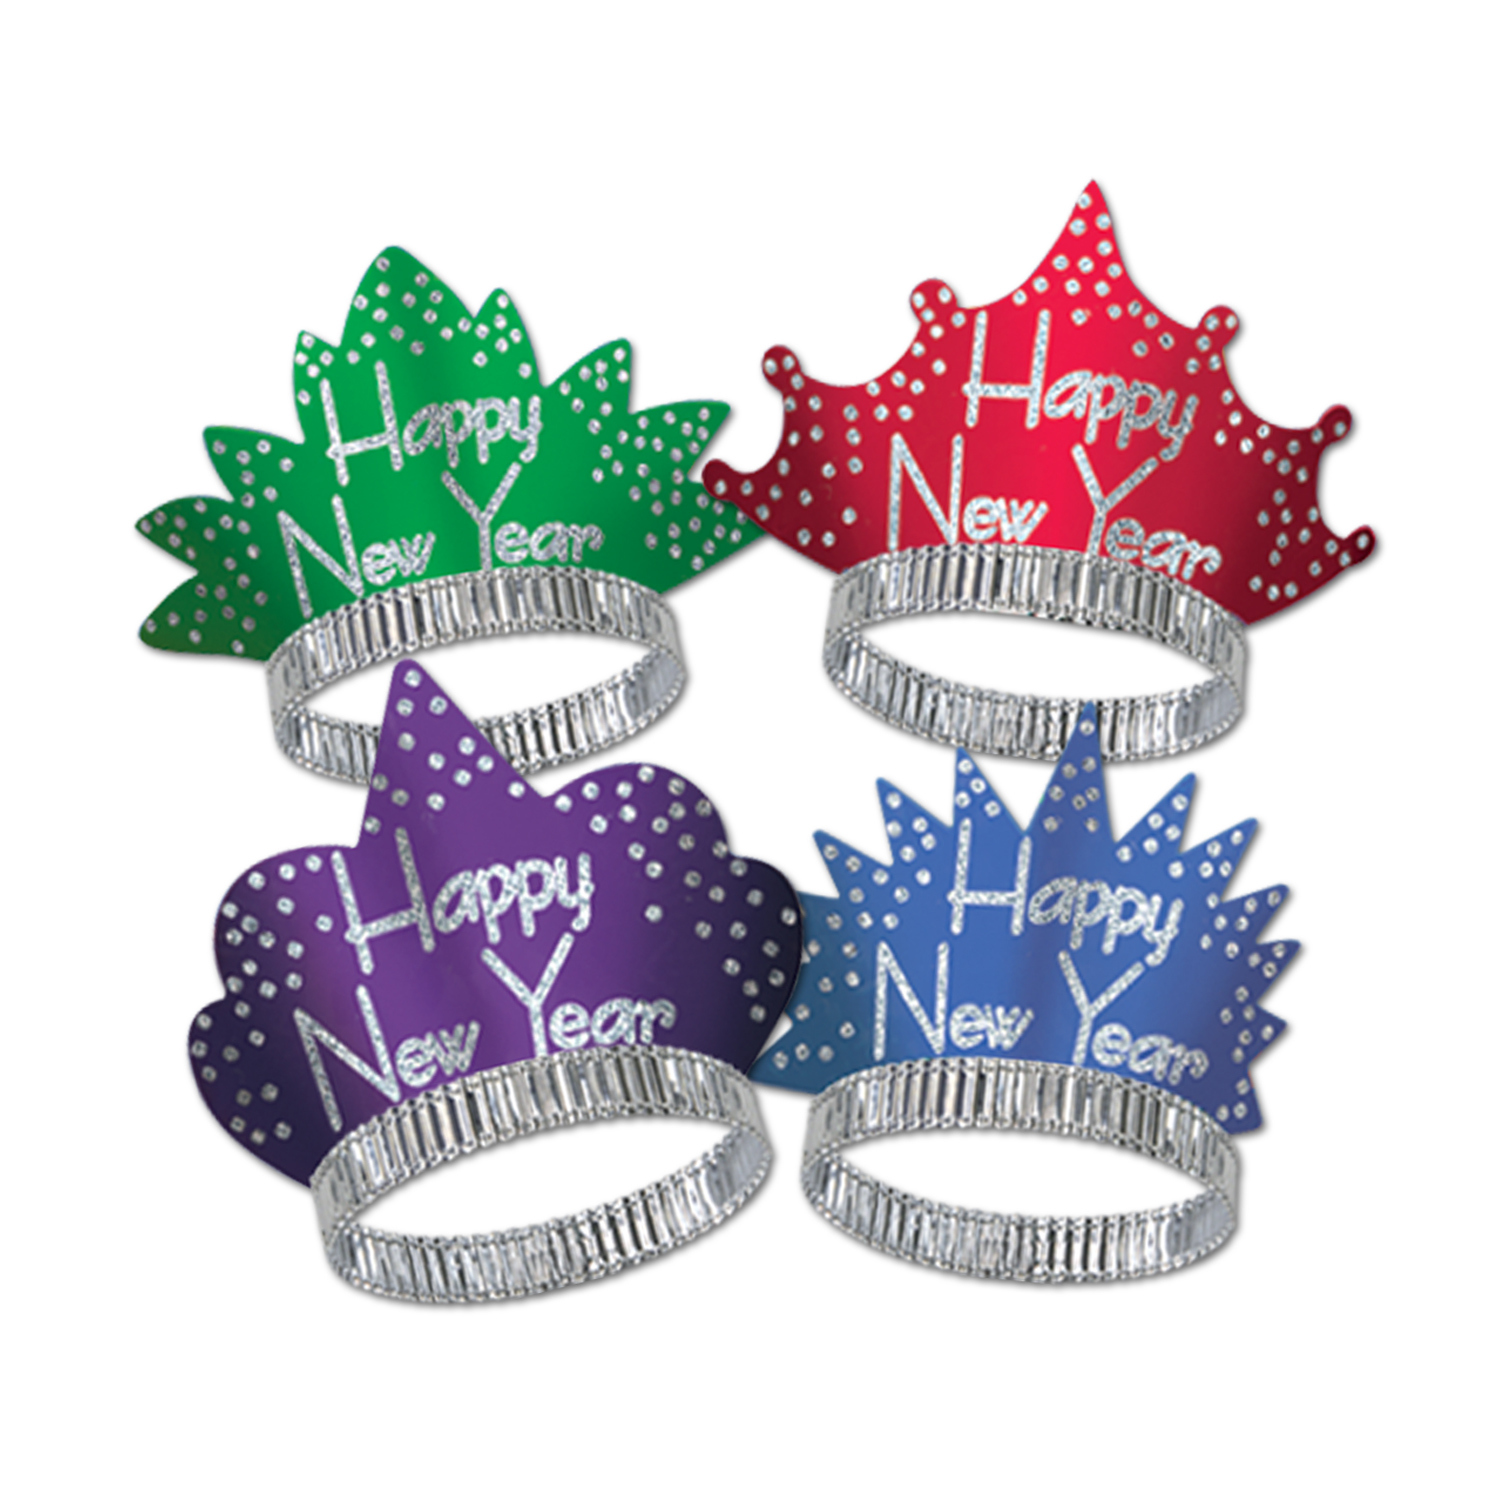 Four different shaped tiaras in different colors with silver confetti and words of "Happy New Year".